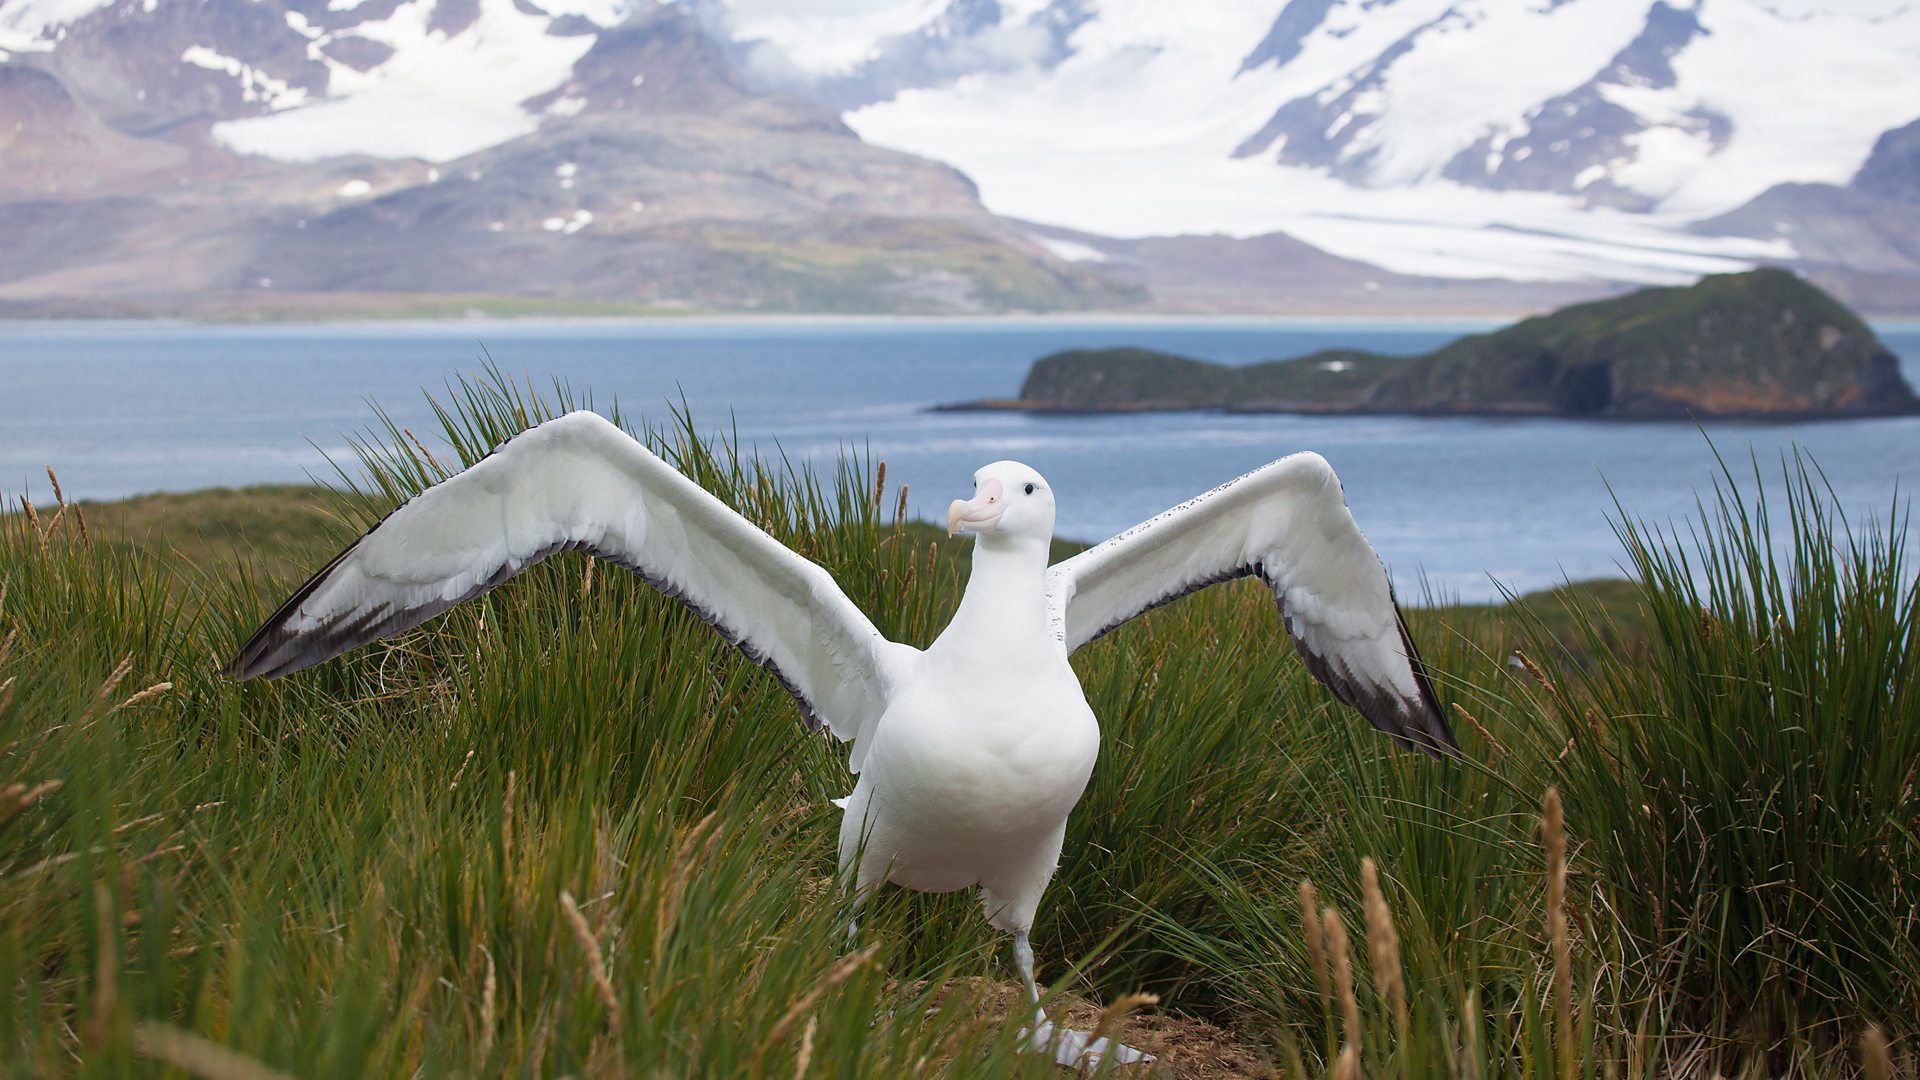 albatross compared to human